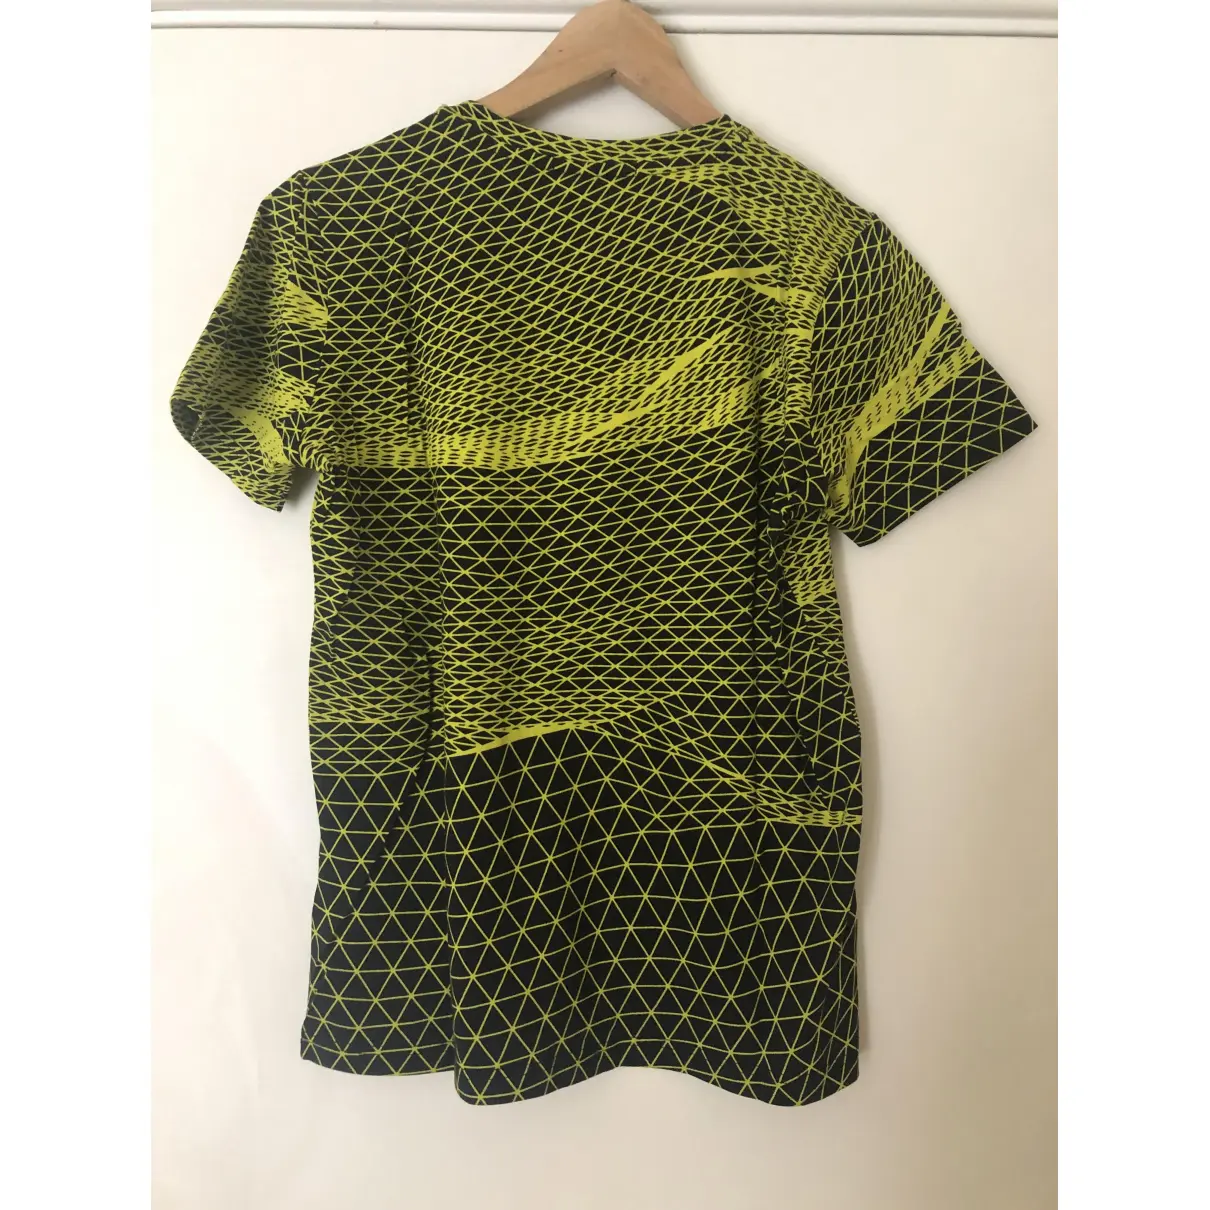 Buy Christopher Kane Yellow Cotton Top online